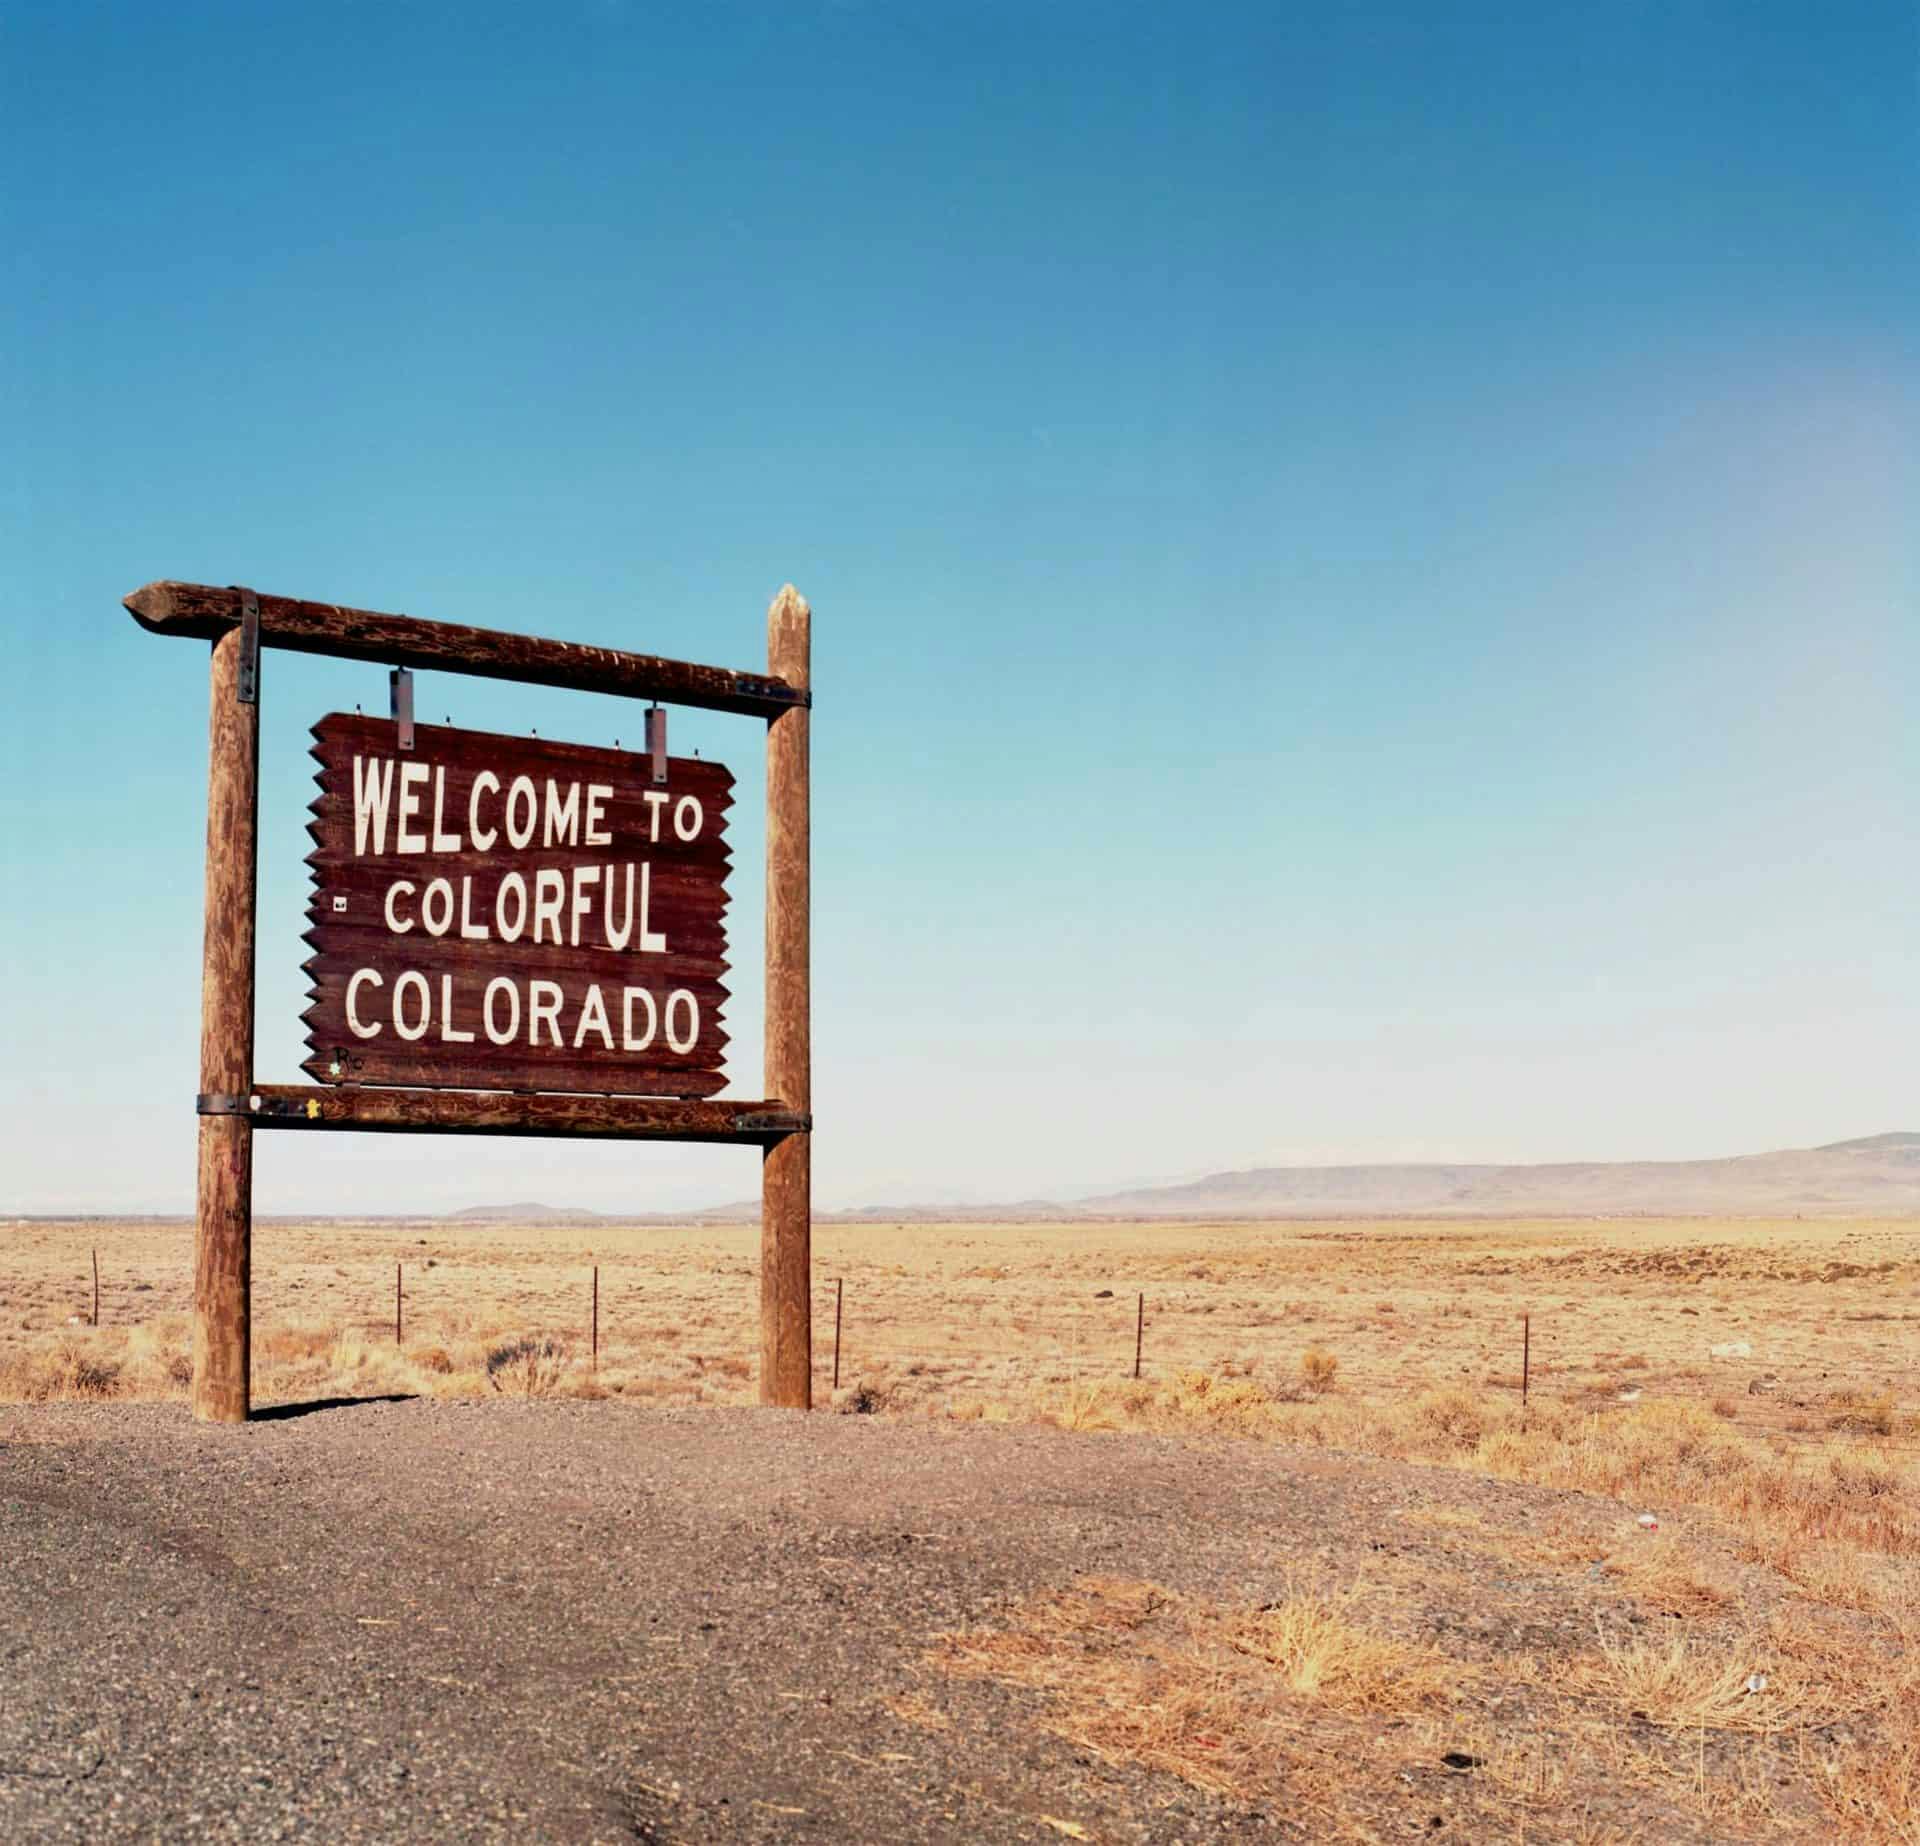 photo of a a sign that says "welcome to colorful Colorado"